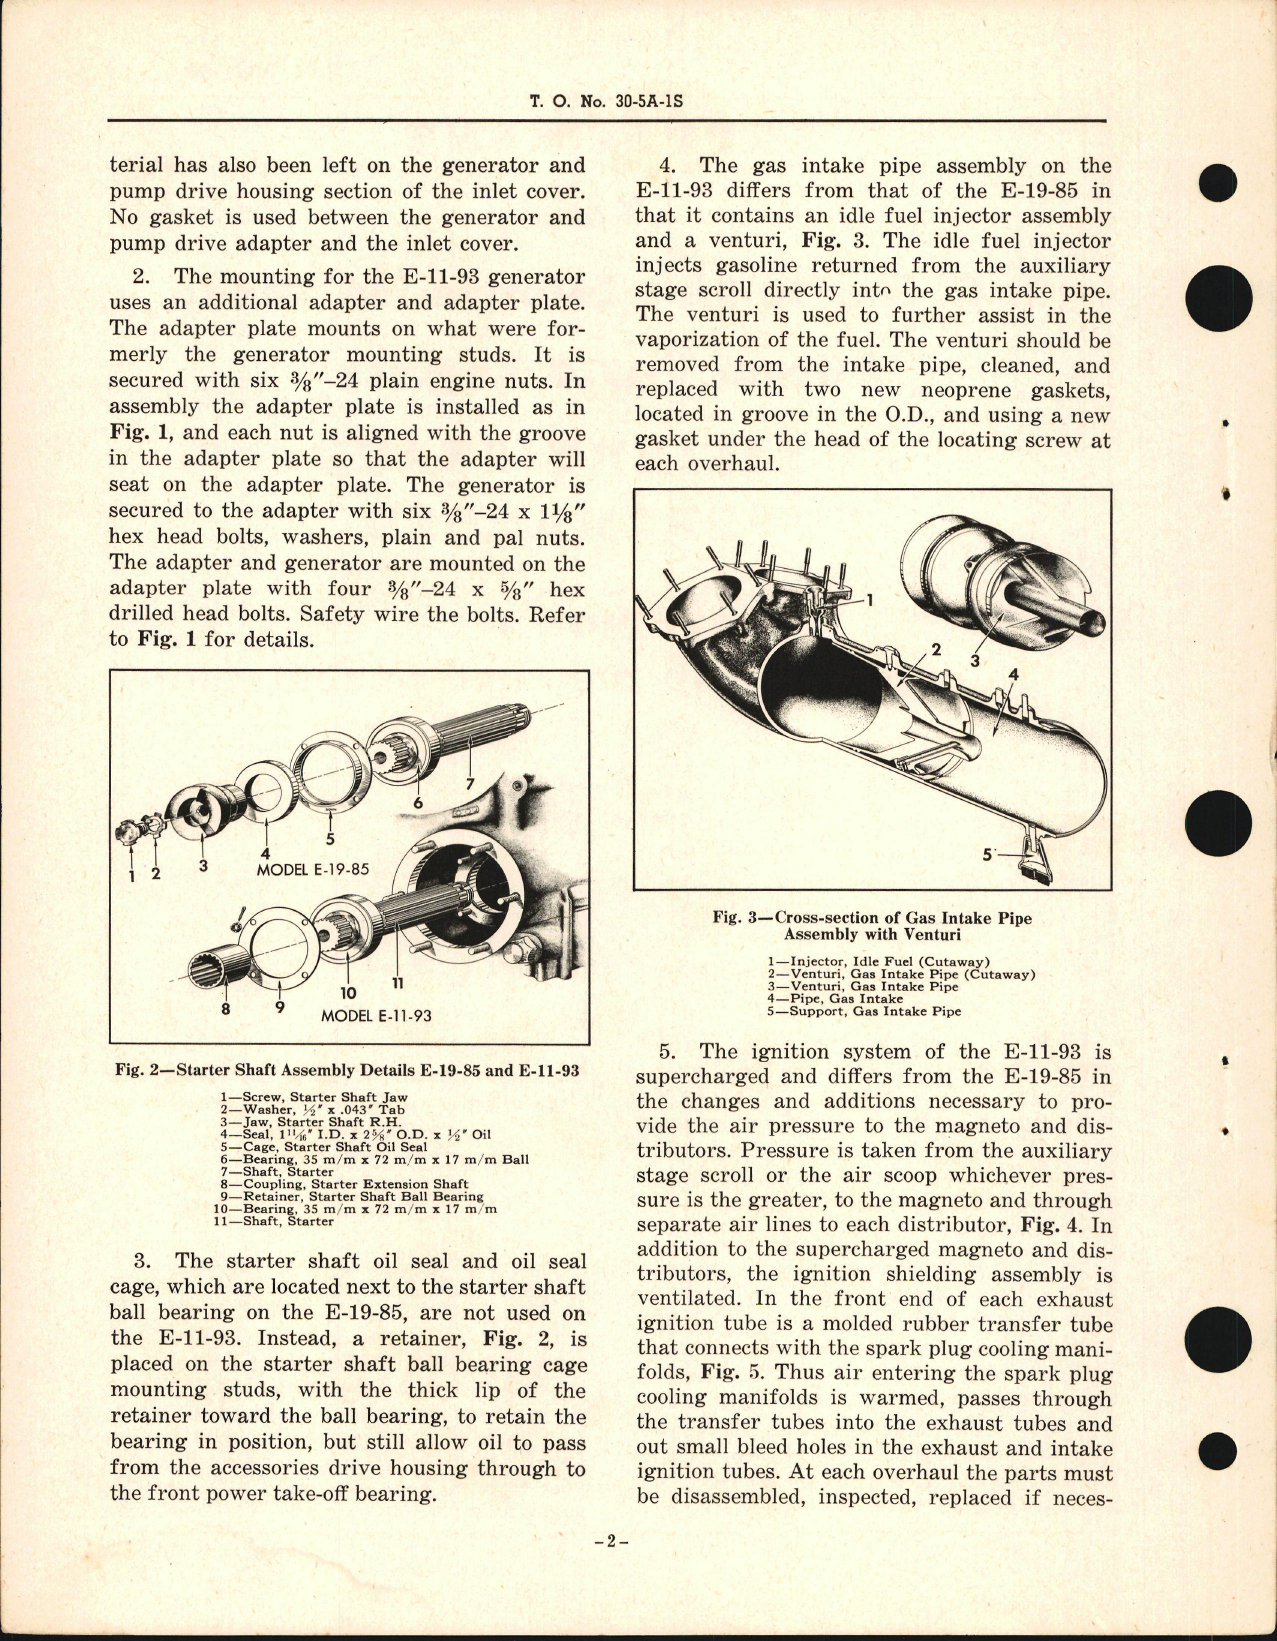 Sample page 6 from AirCorps Library document: Information Guide for Auxiliary Stage Supercharger for V-1710 Engines